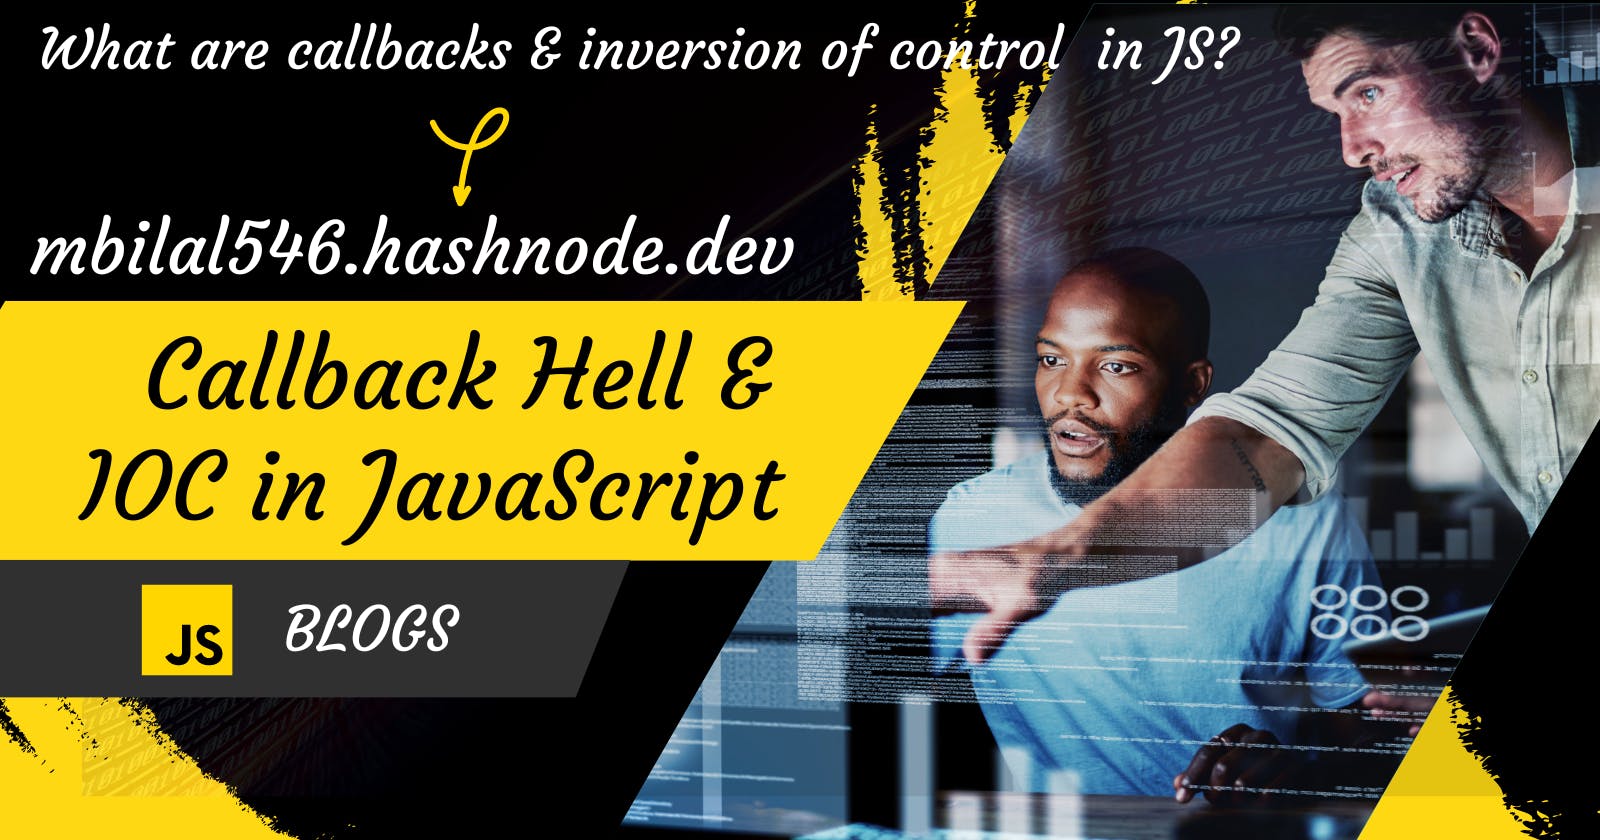 What are the callbacks, callback hell, and inversion of control (IOC) in JavaScript in depth